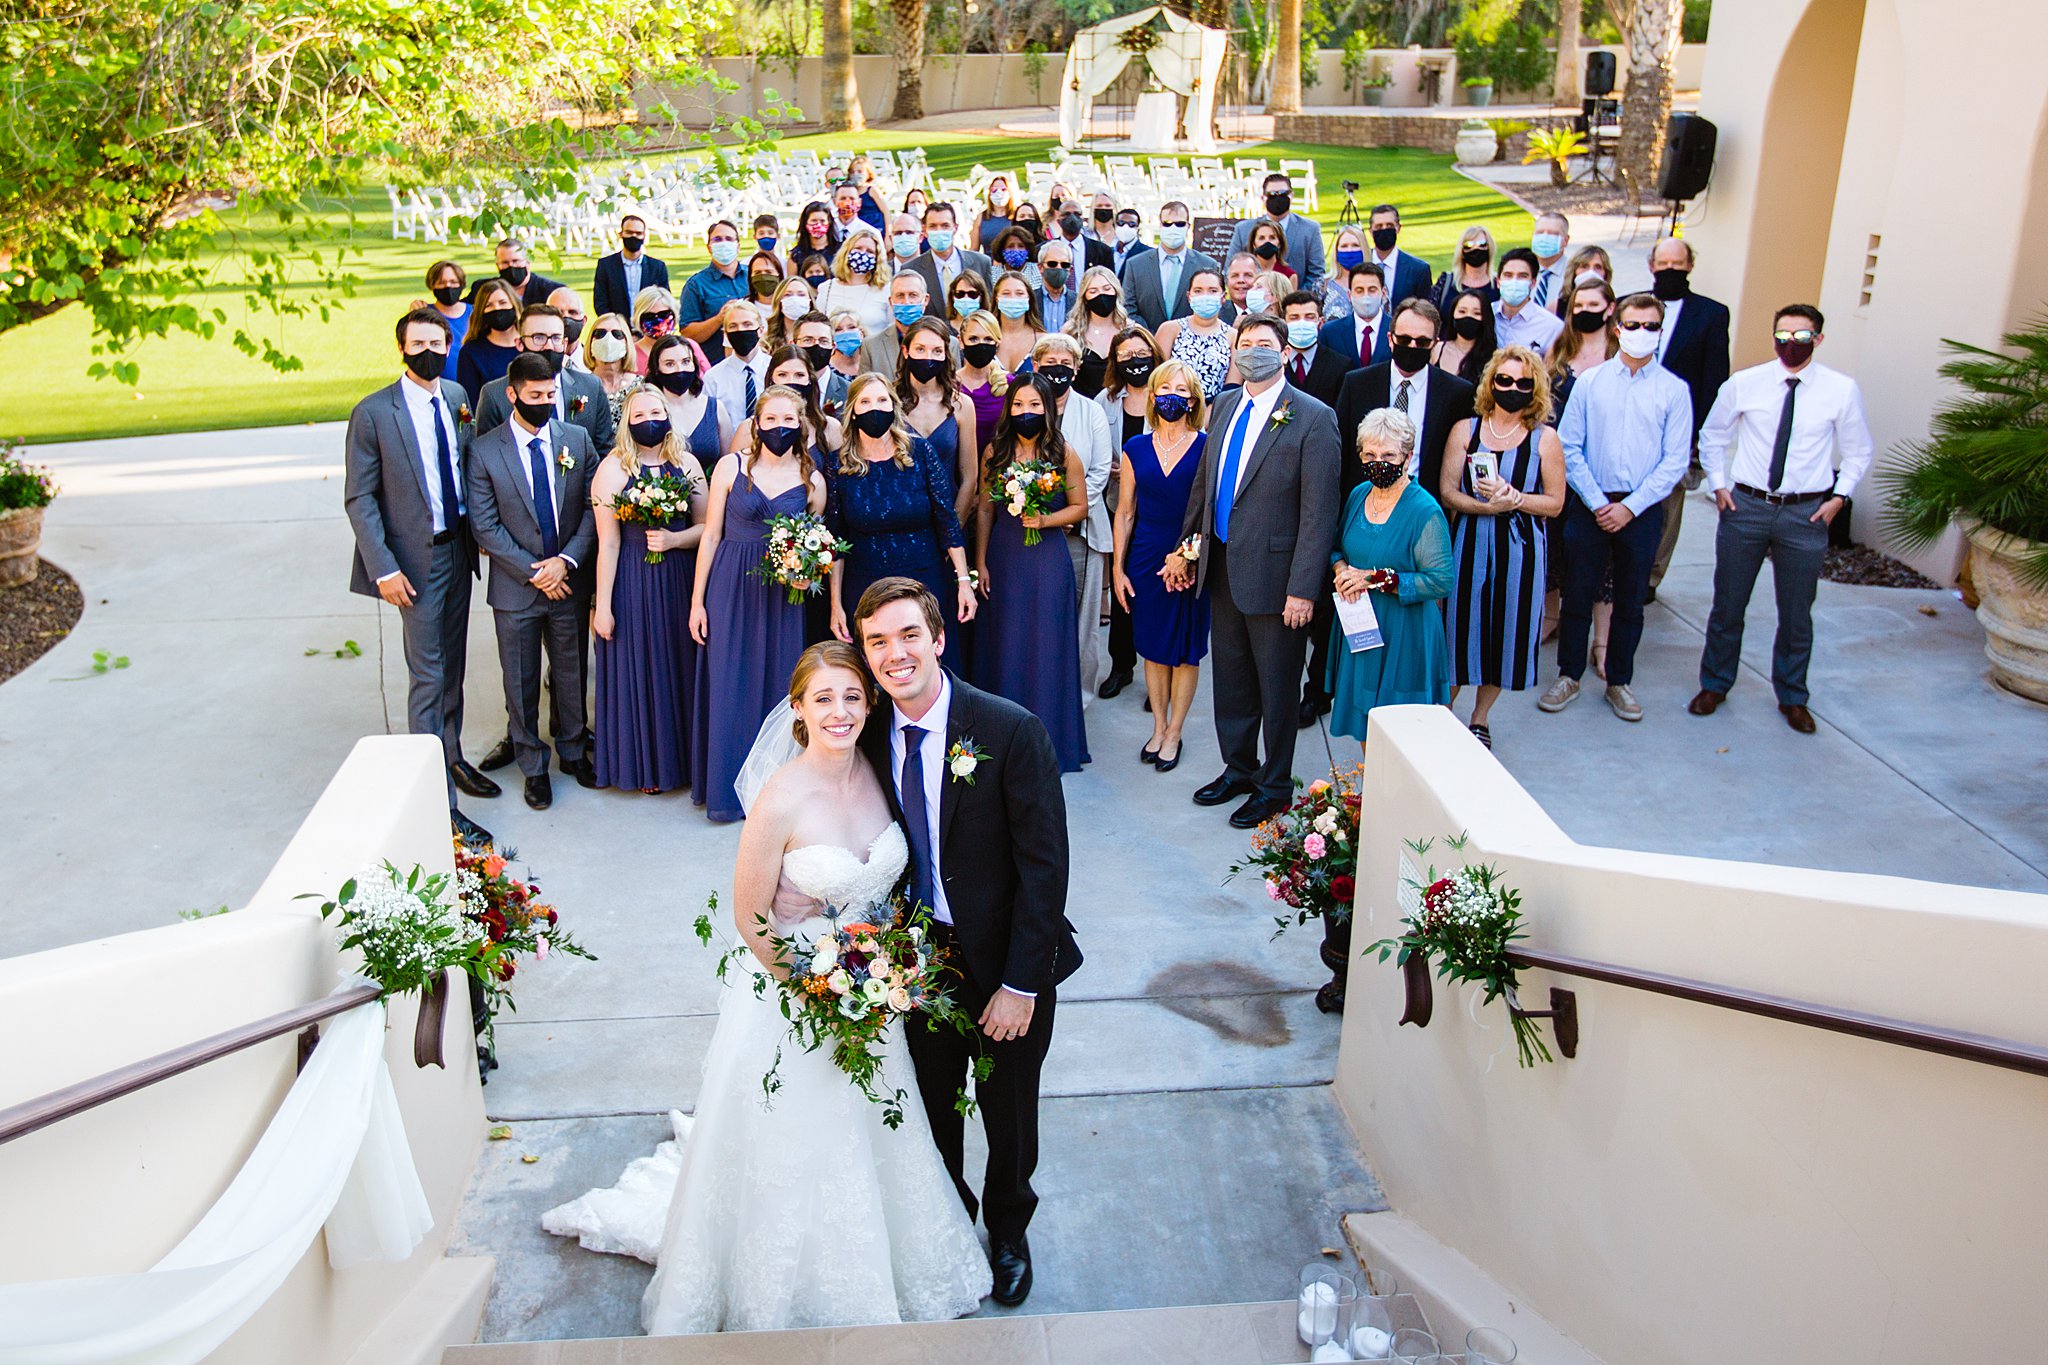 Bride and groom with their wedding guests at a Secret Garden Events Center wedding by Phoenix wedding photographer PMA Photography.